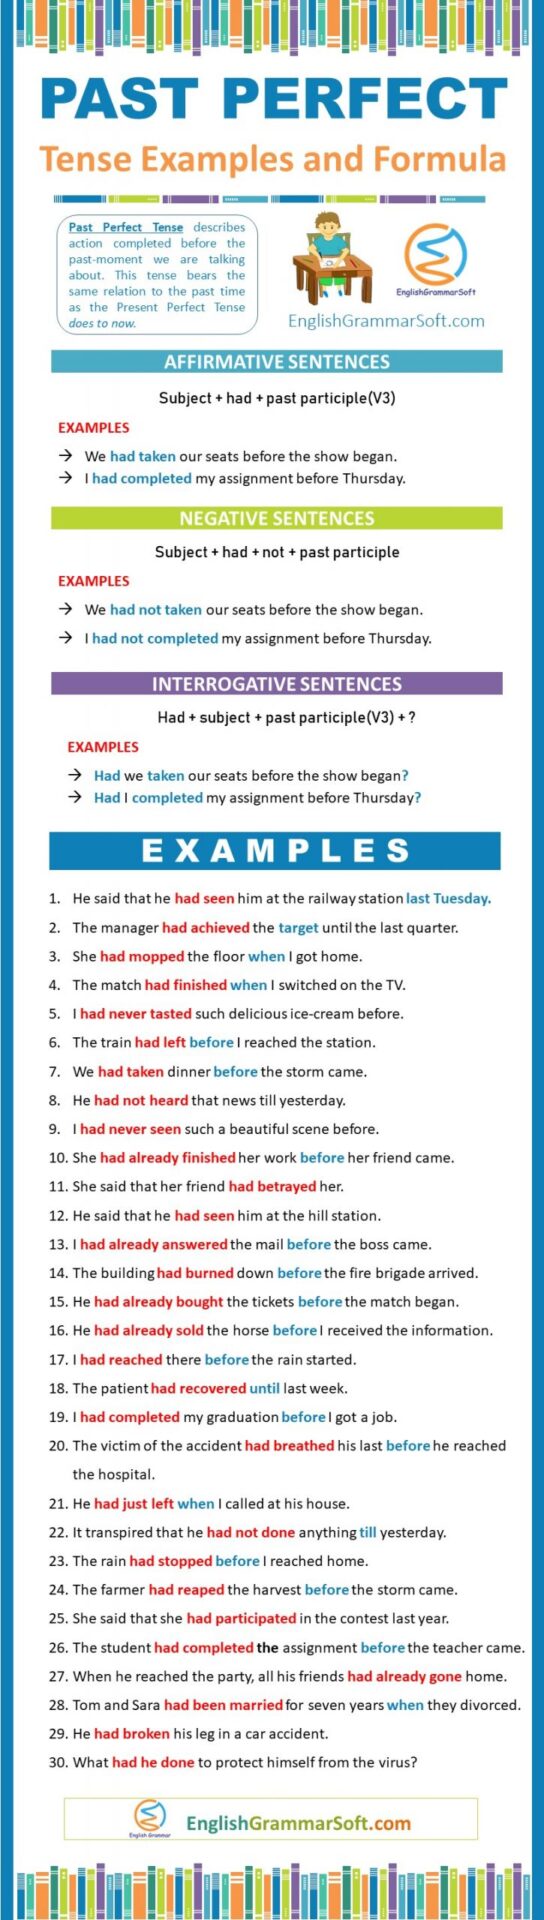 Past Perfect Tense with Examples